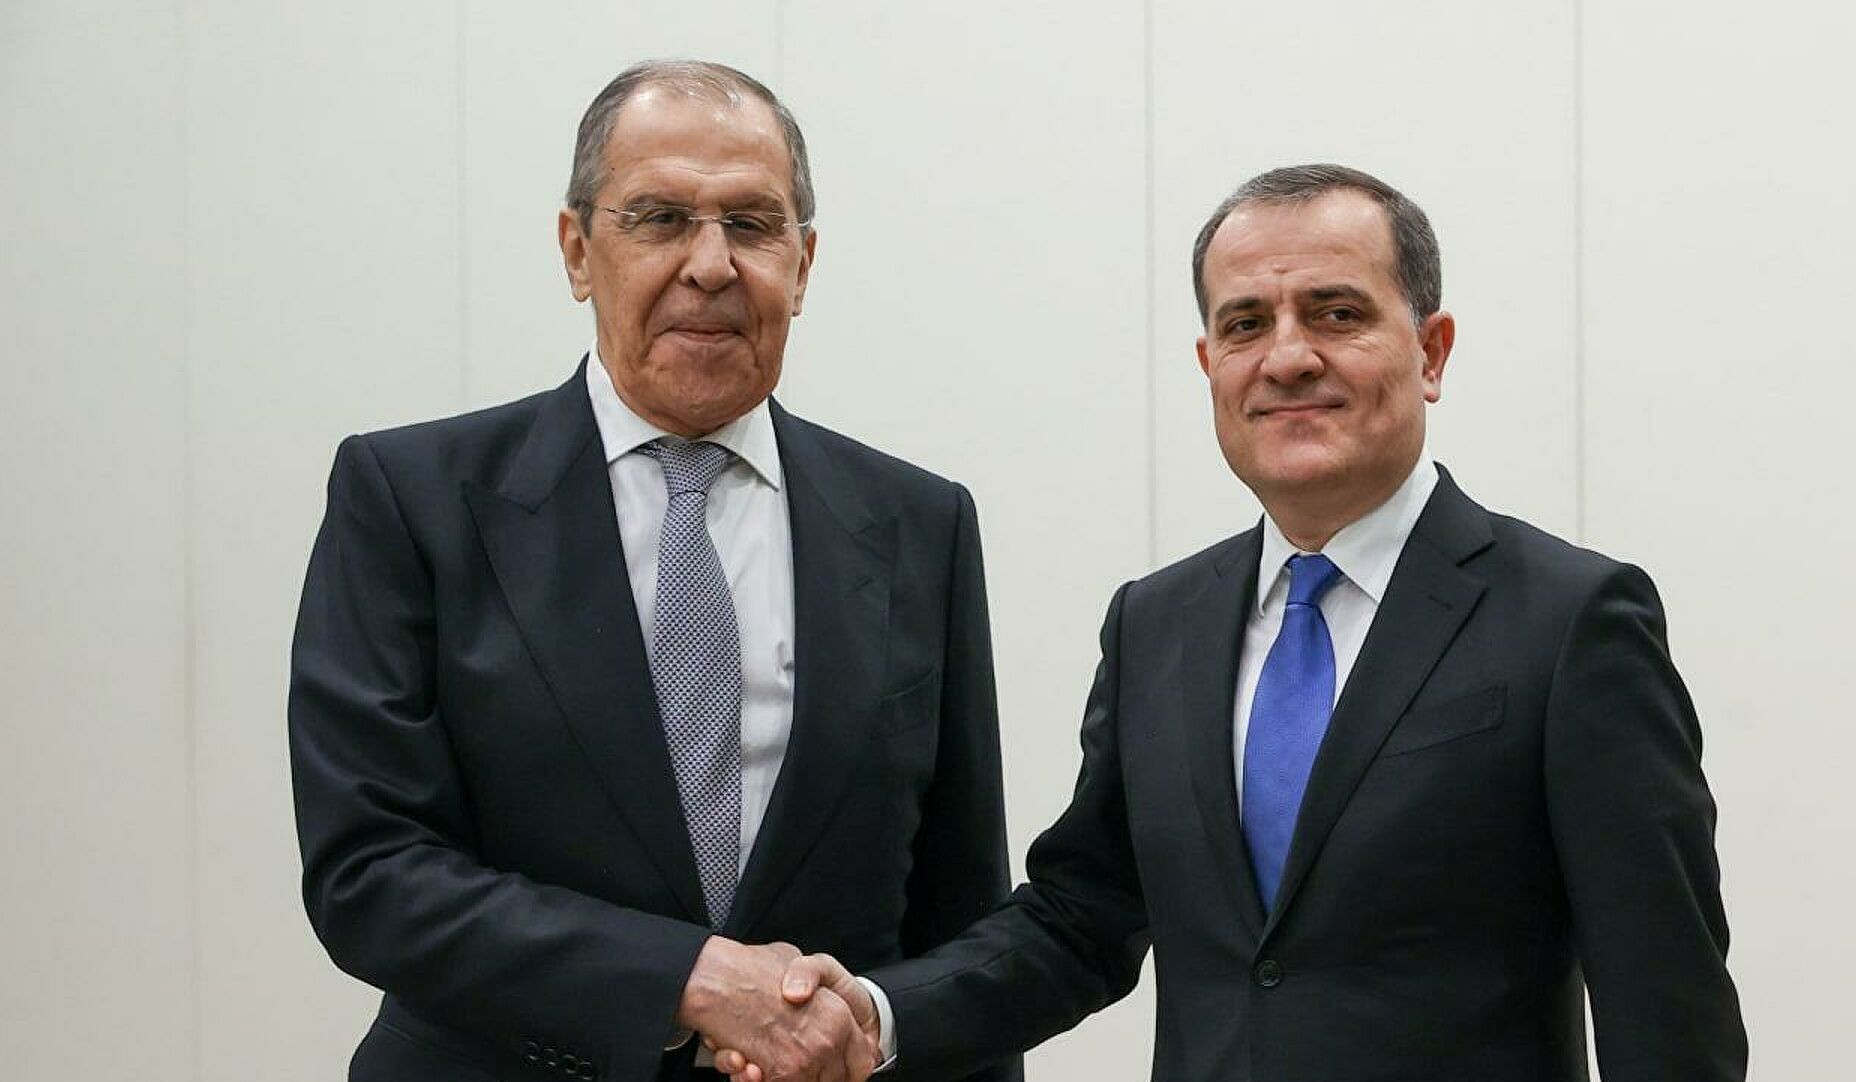 Russian and Azerbaijani Foreign Ministers discussed process of fulfilling agreements around Artsakh